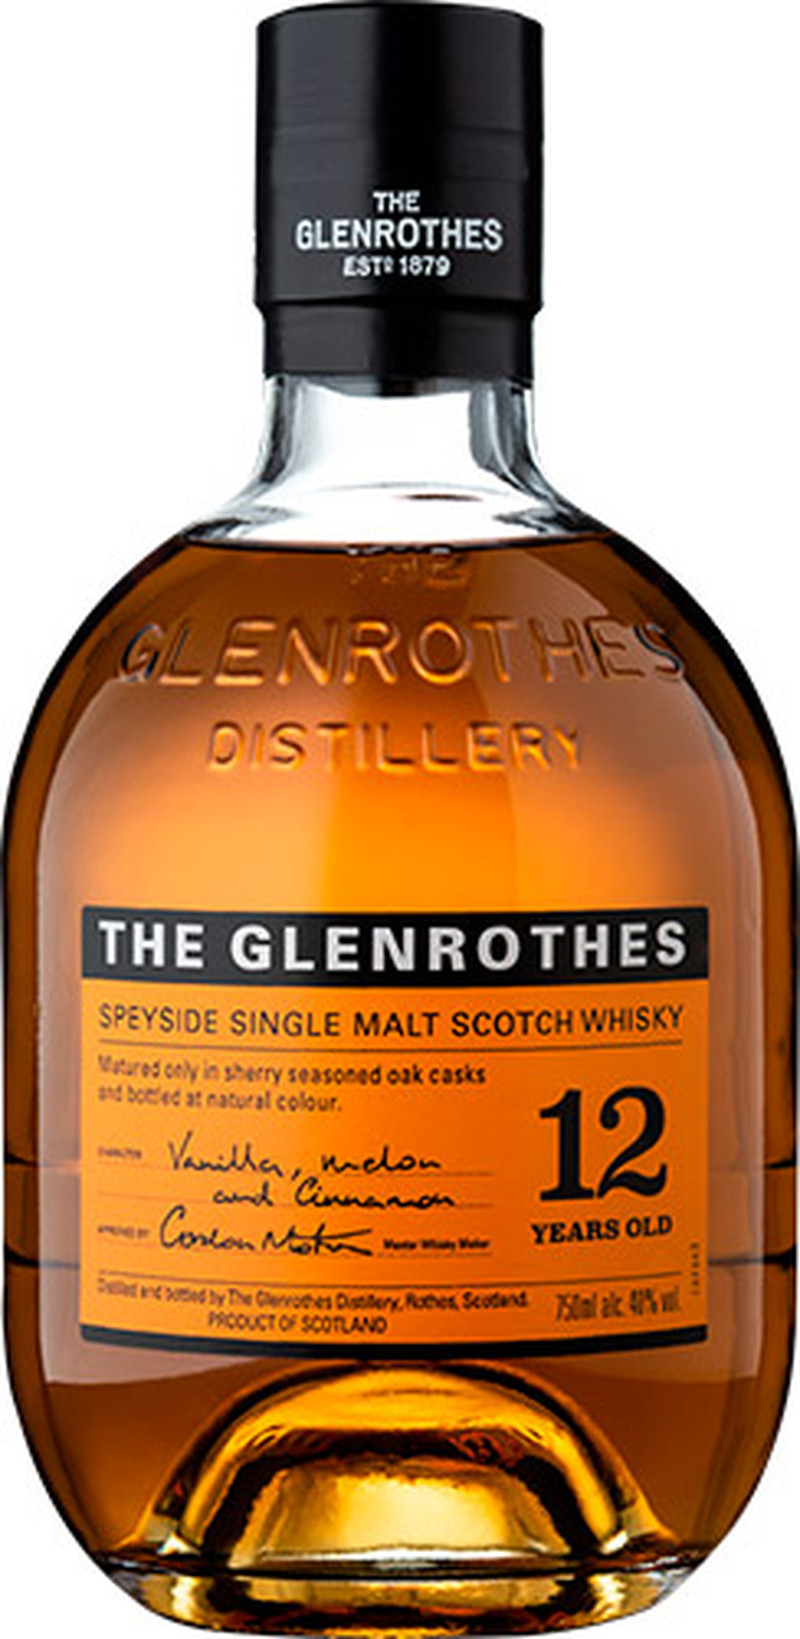 THE GLENROTHES 12YRS